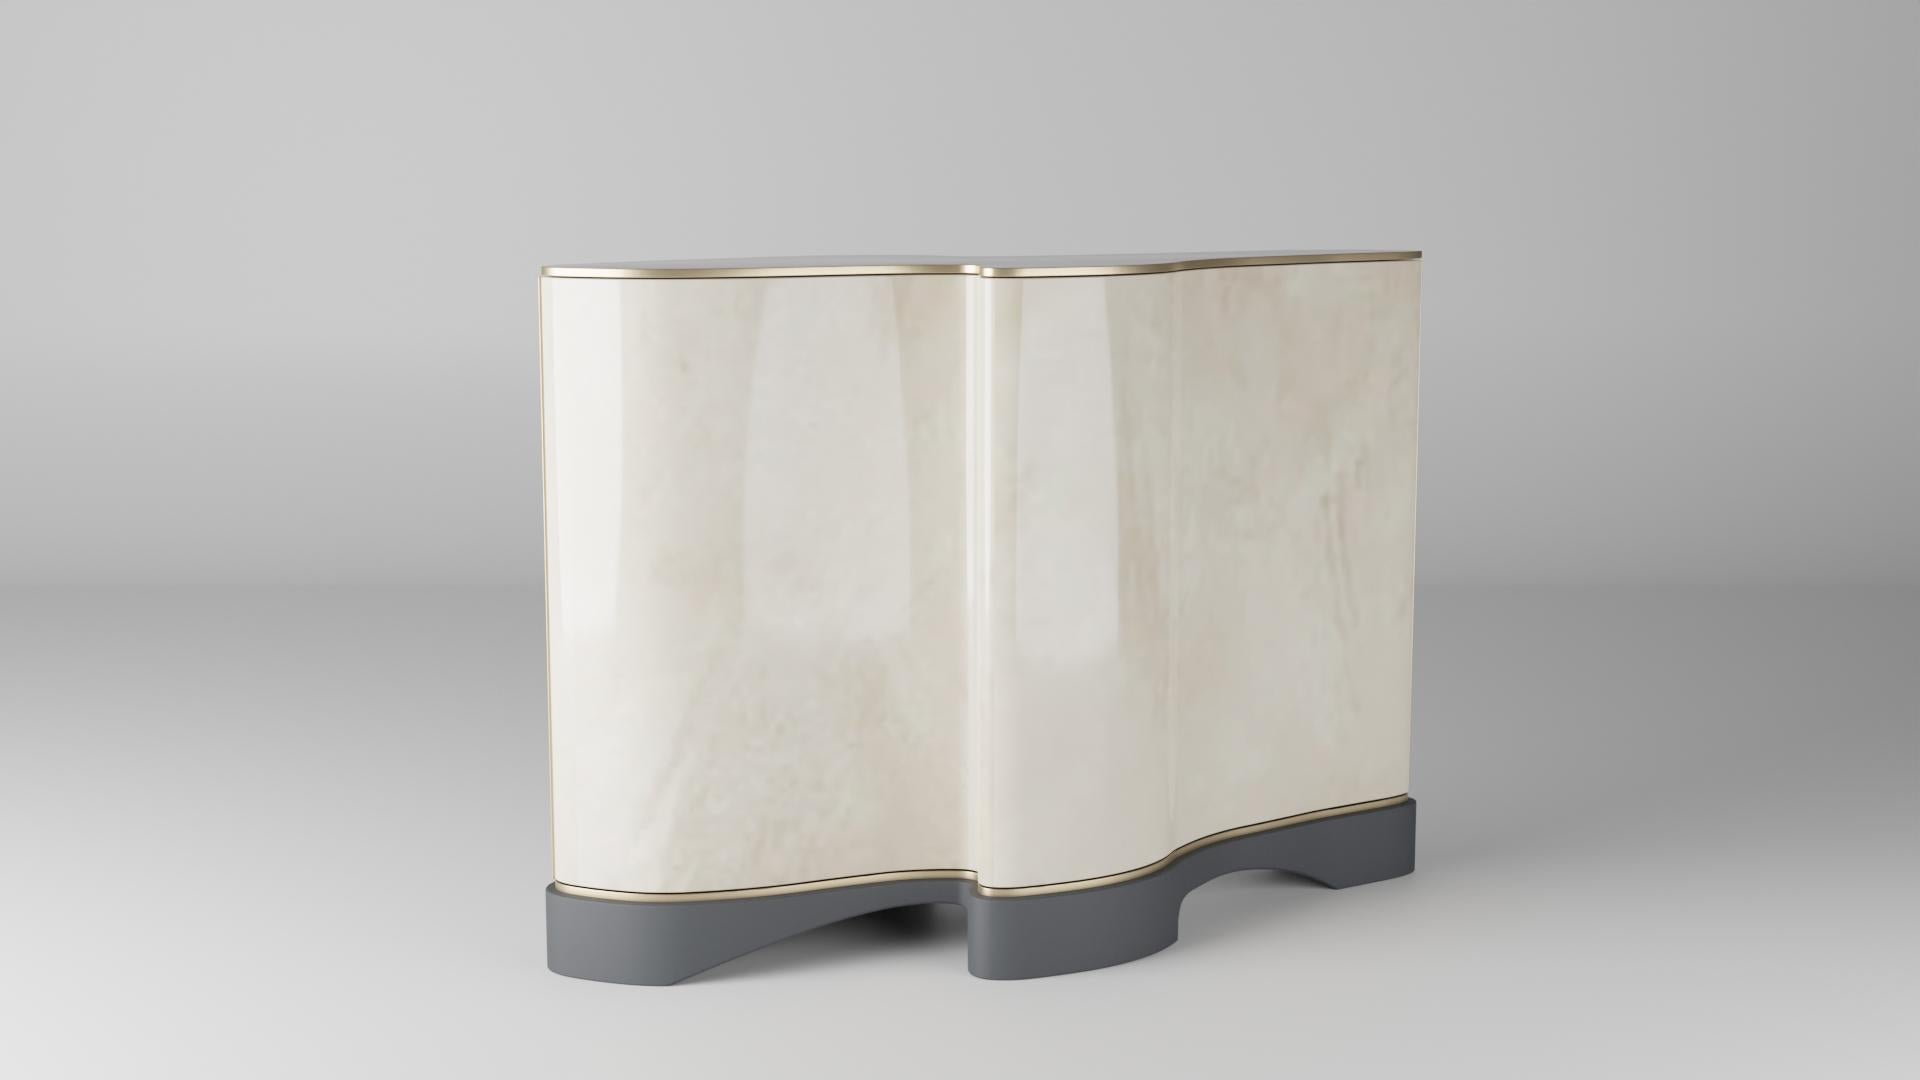 The Extruder Holocene sideboard has been designed and created by extruding a cut from the Holocene dining table sculptural form. The organic shape has a waterfall-like feeling cascading around the shape of the piece. Two doors hinge on custom-made